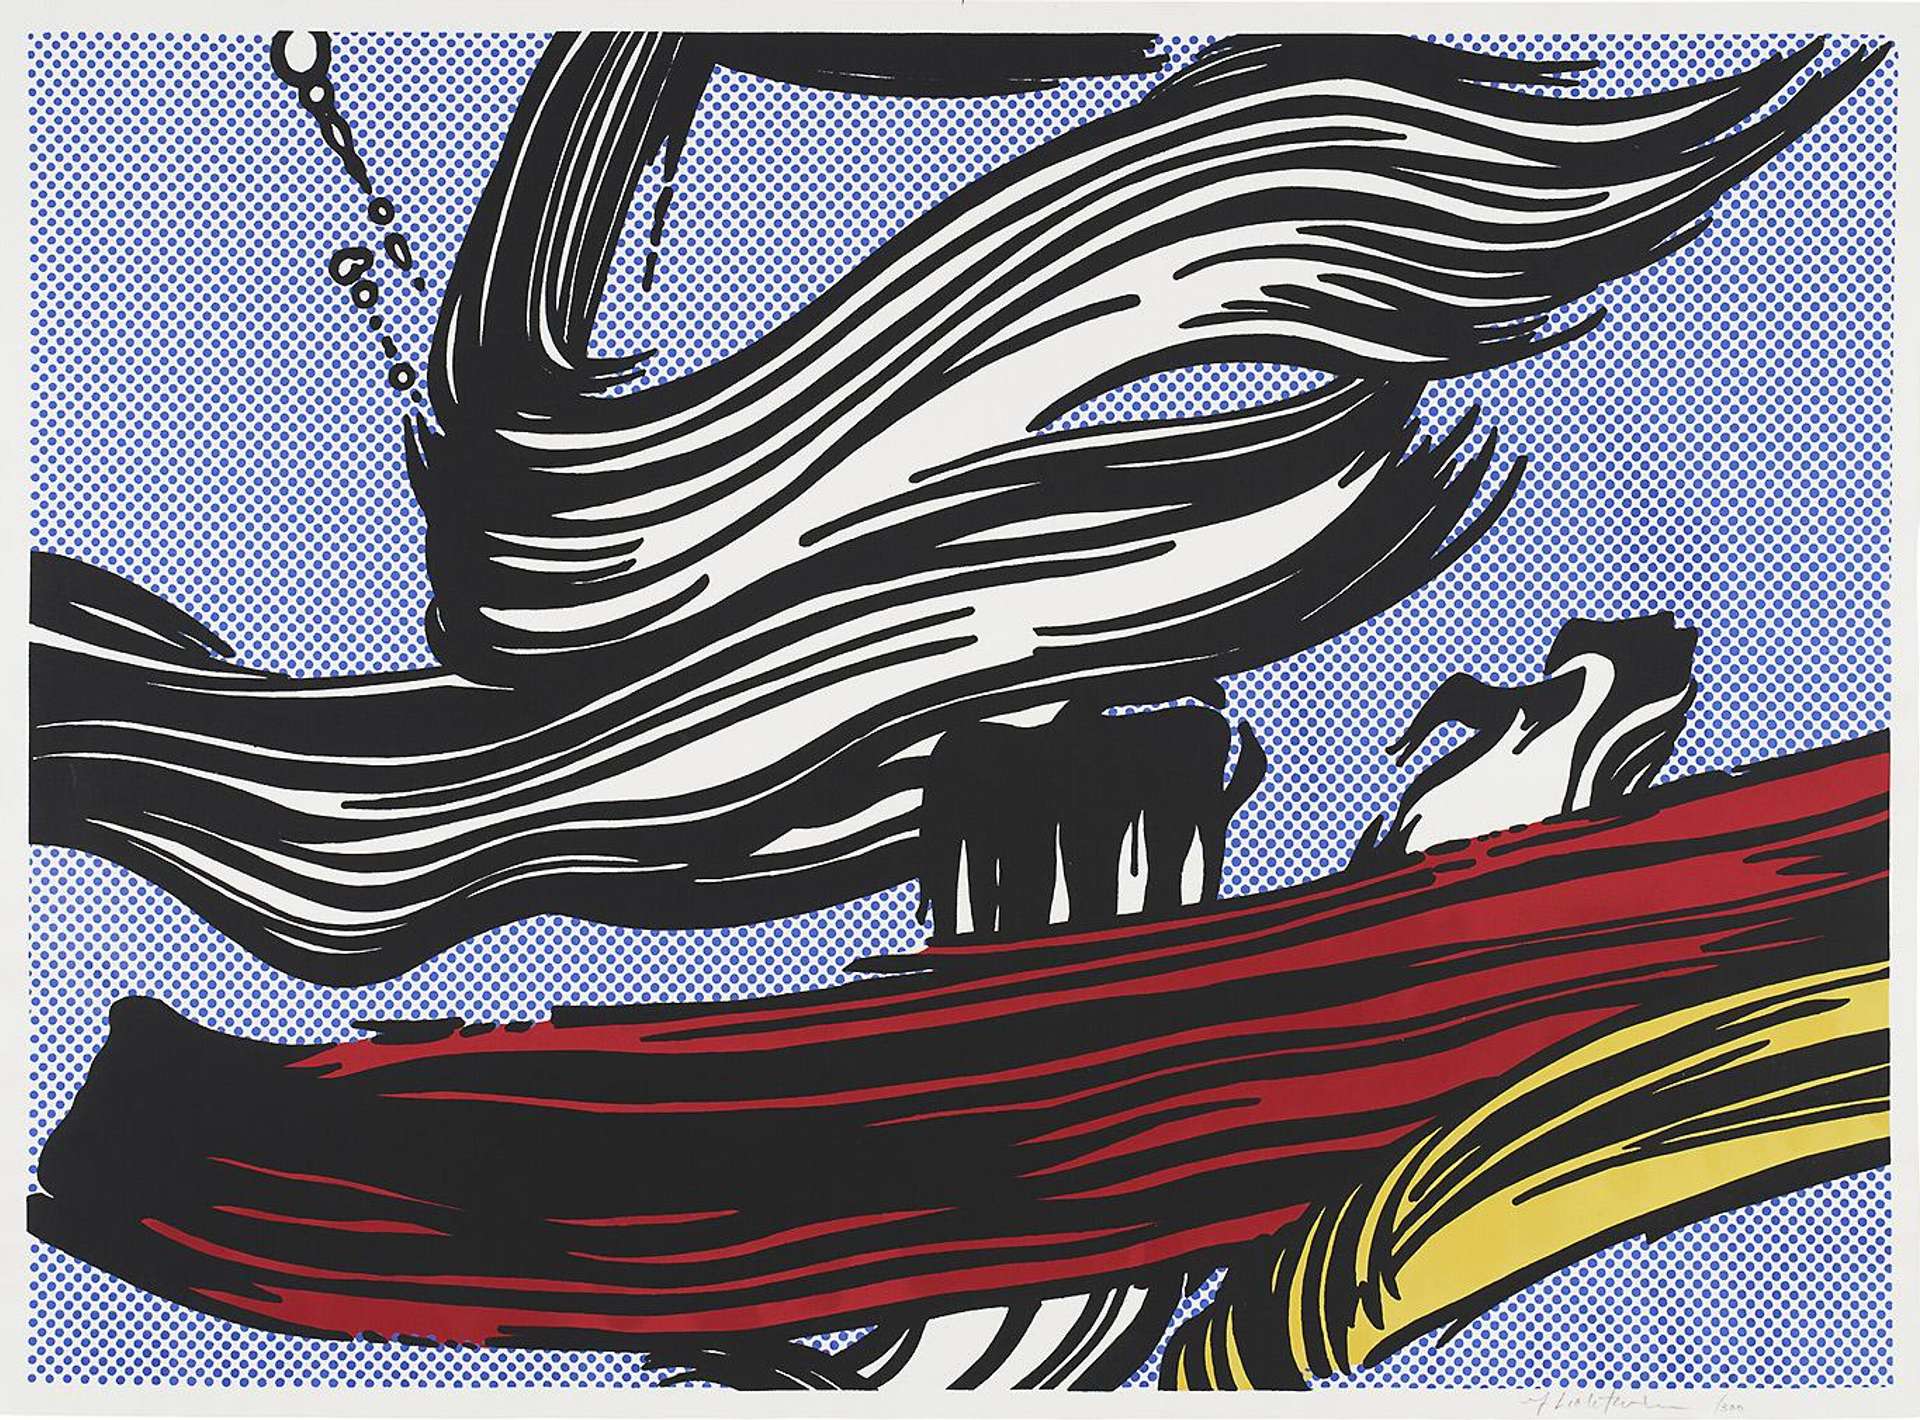 A graphic screenprint depiction of white, yellow and red brushstrokes by Roy Lichtenstein.